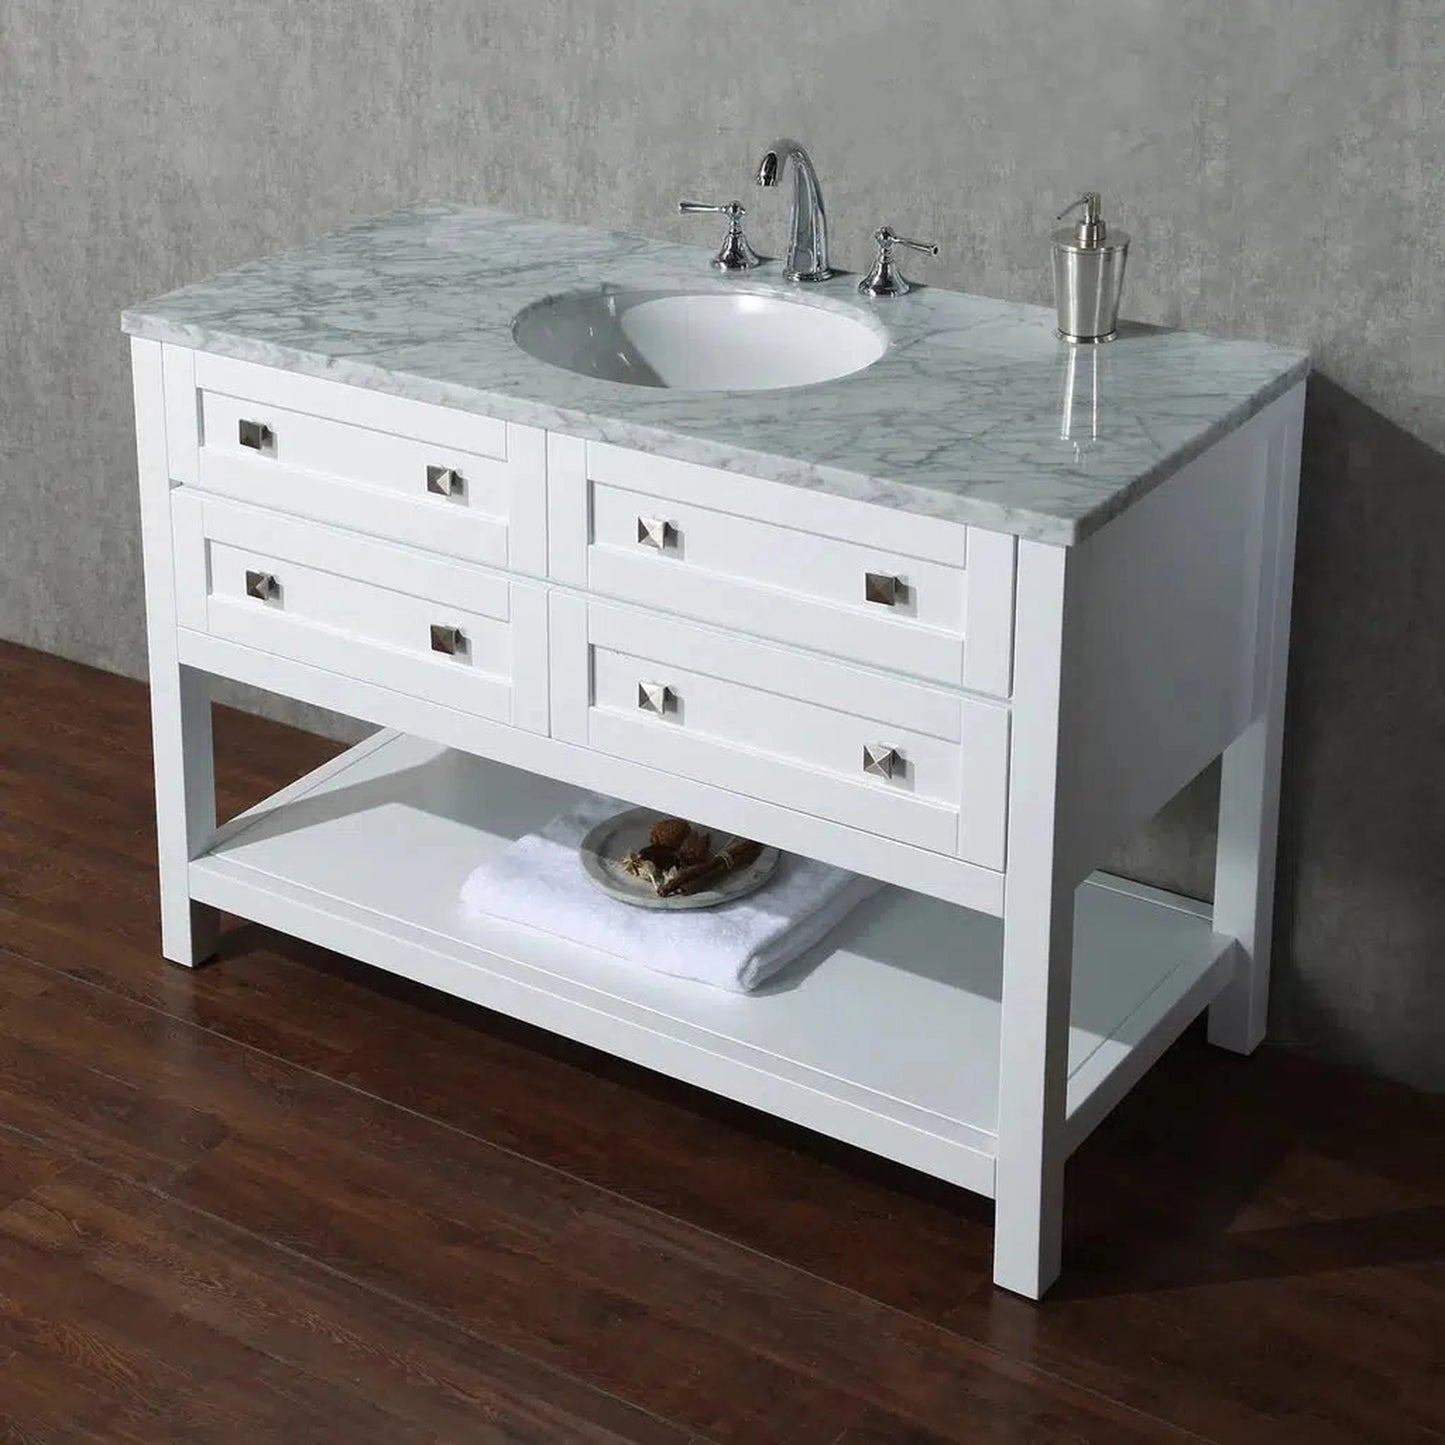 Stufurhome Marla 48" White Freestanding Bathroom Vanity With Oval Single Sink, Carrara White Marble Top, 4 Functional Drawers and Widespread Faucet Holes